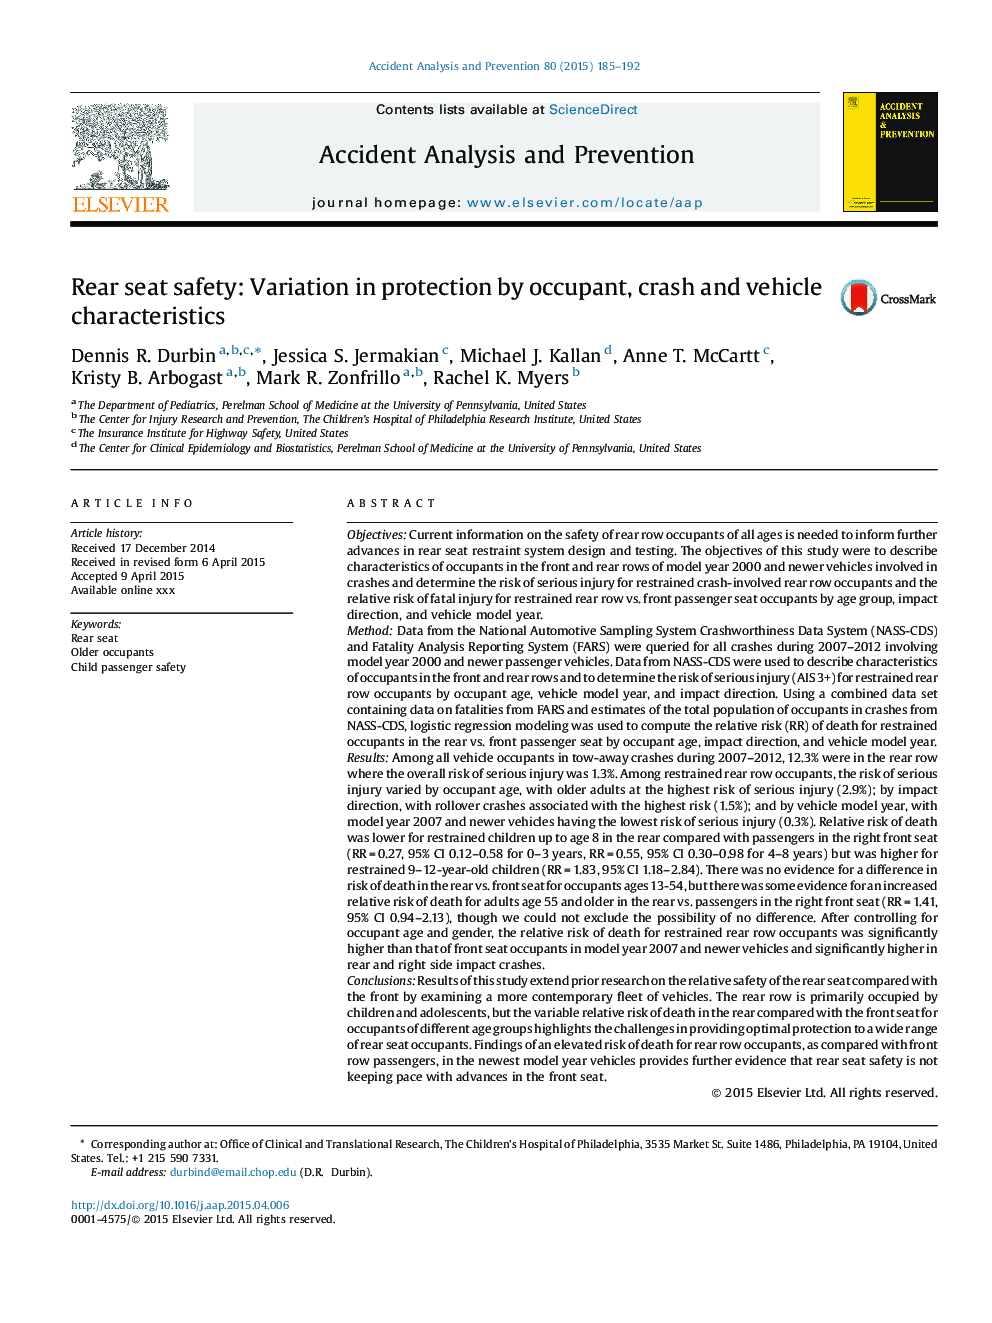 Rear seat safety: Variation in protection by occupant, crash and vehicle characteristics